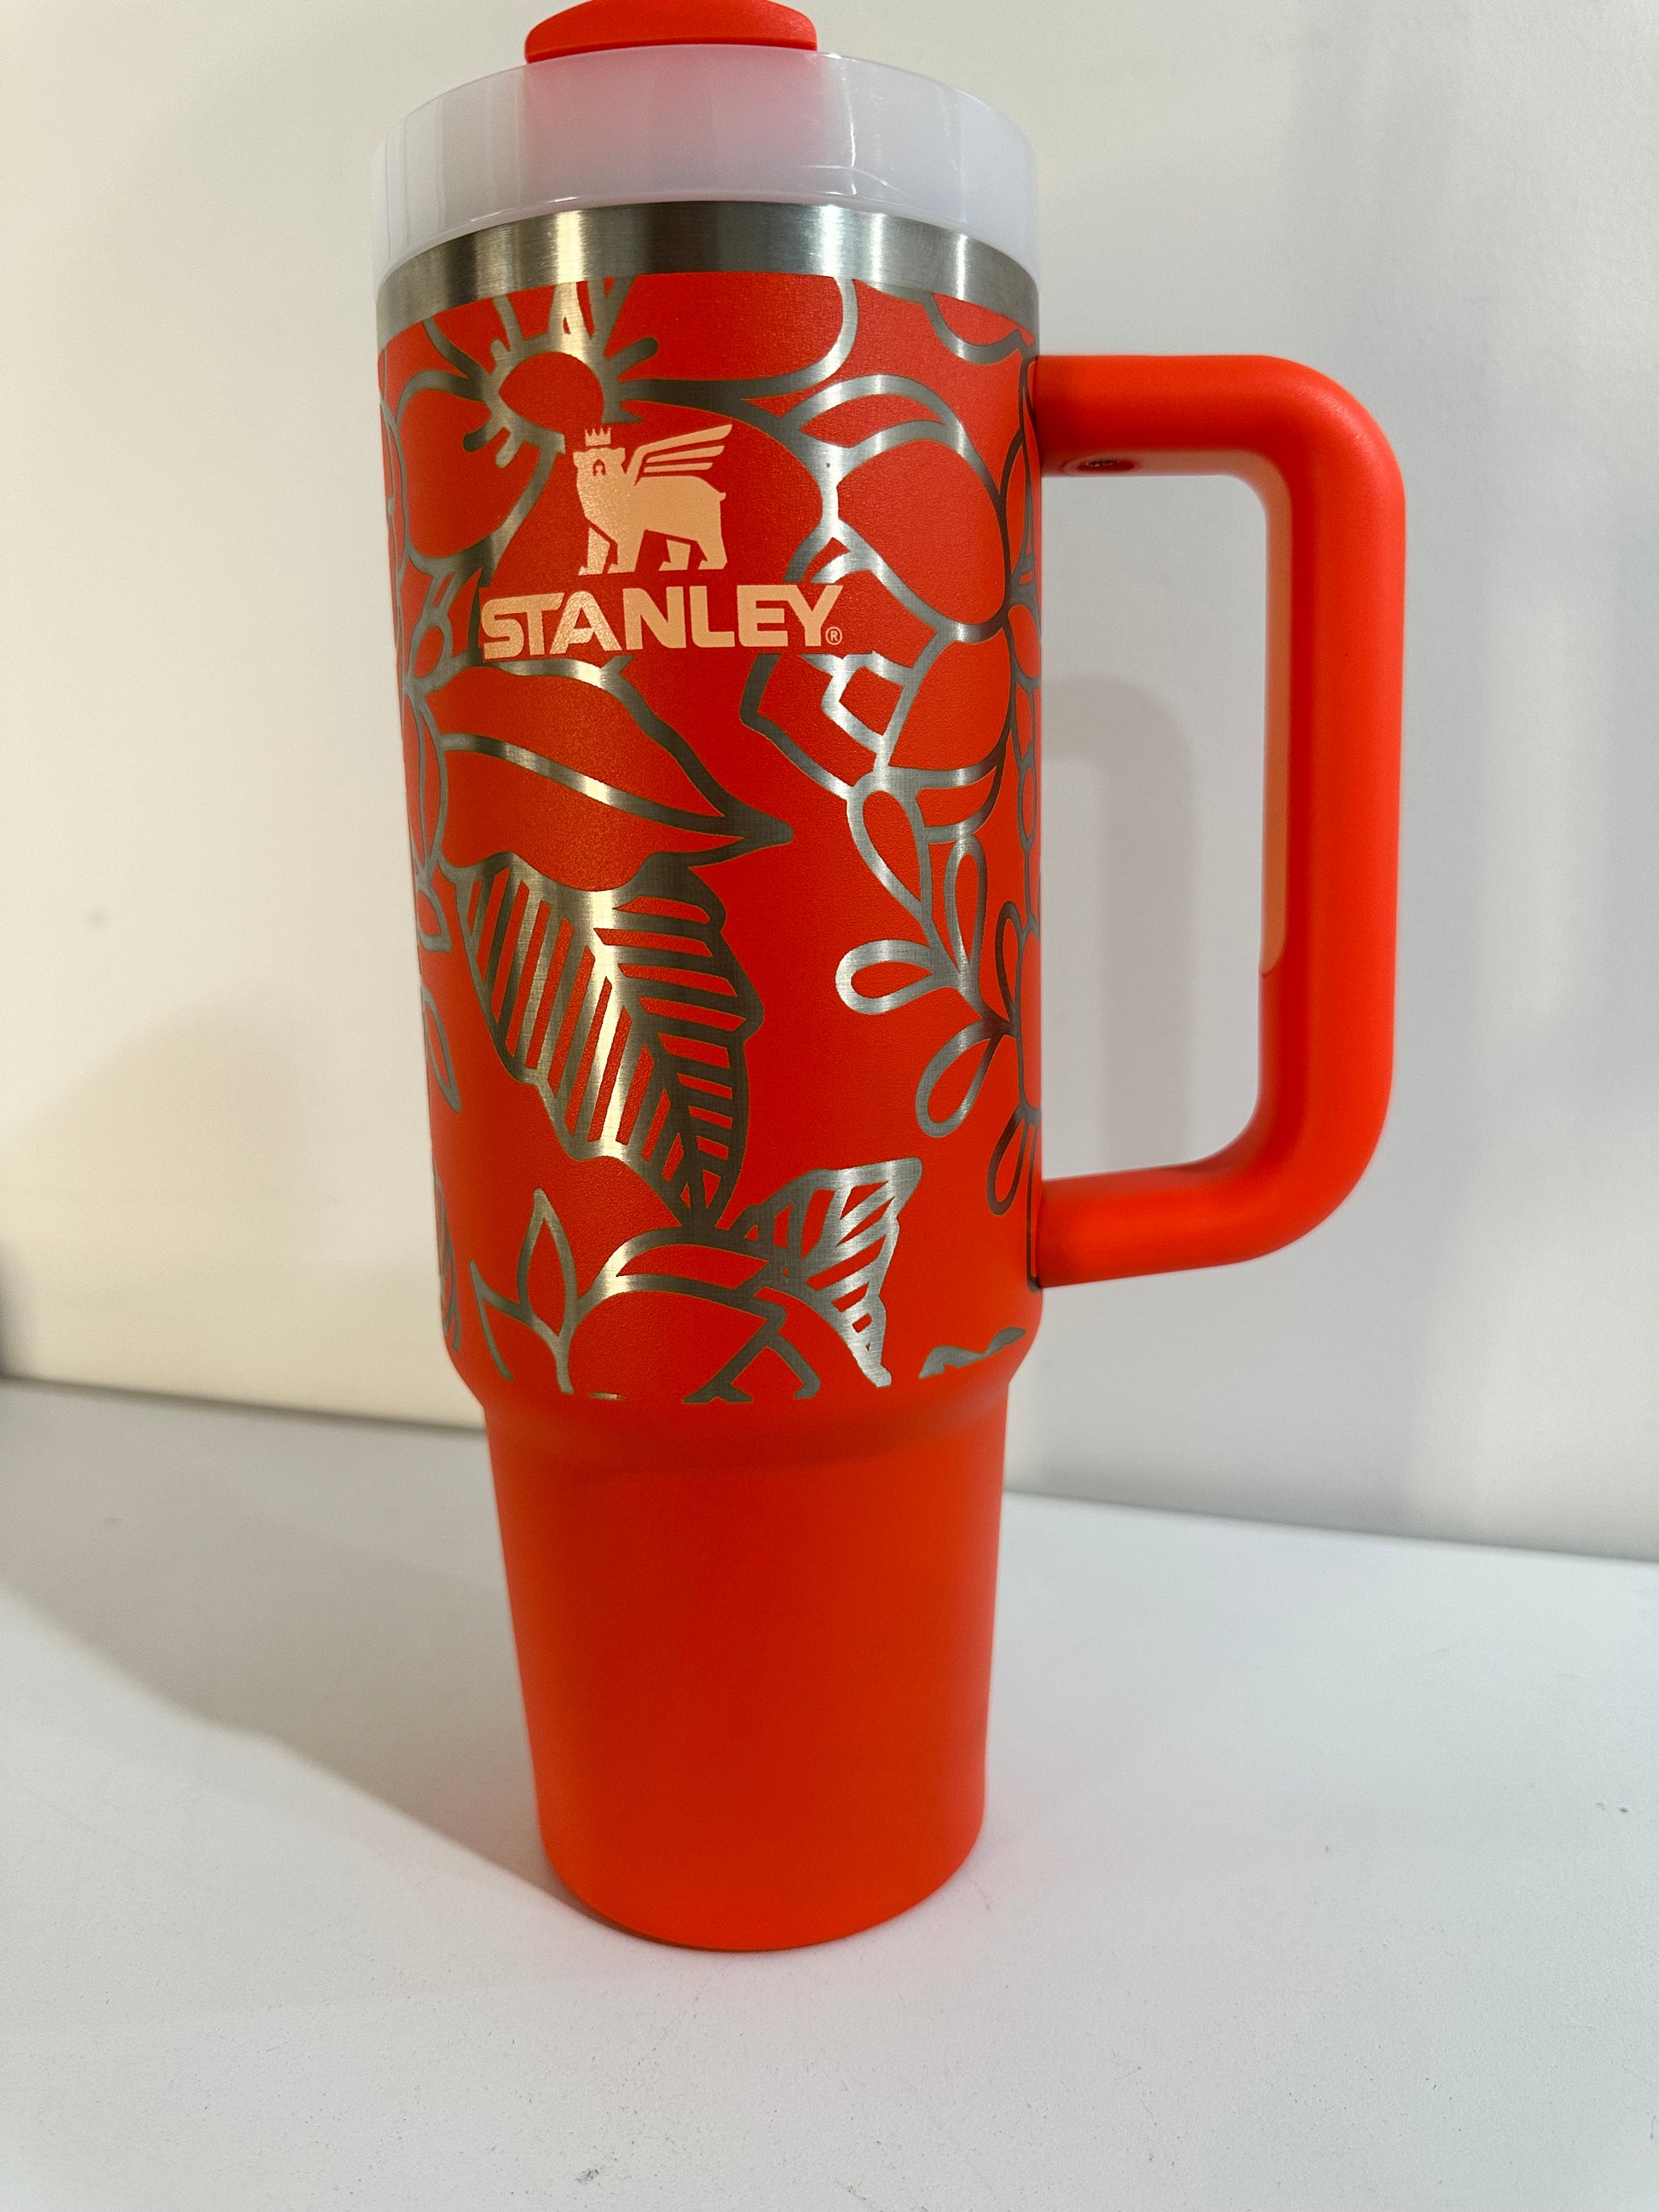 Stanley - 30 oz The Quencher Insulated Tumbler - Fog – Sunset & Co.